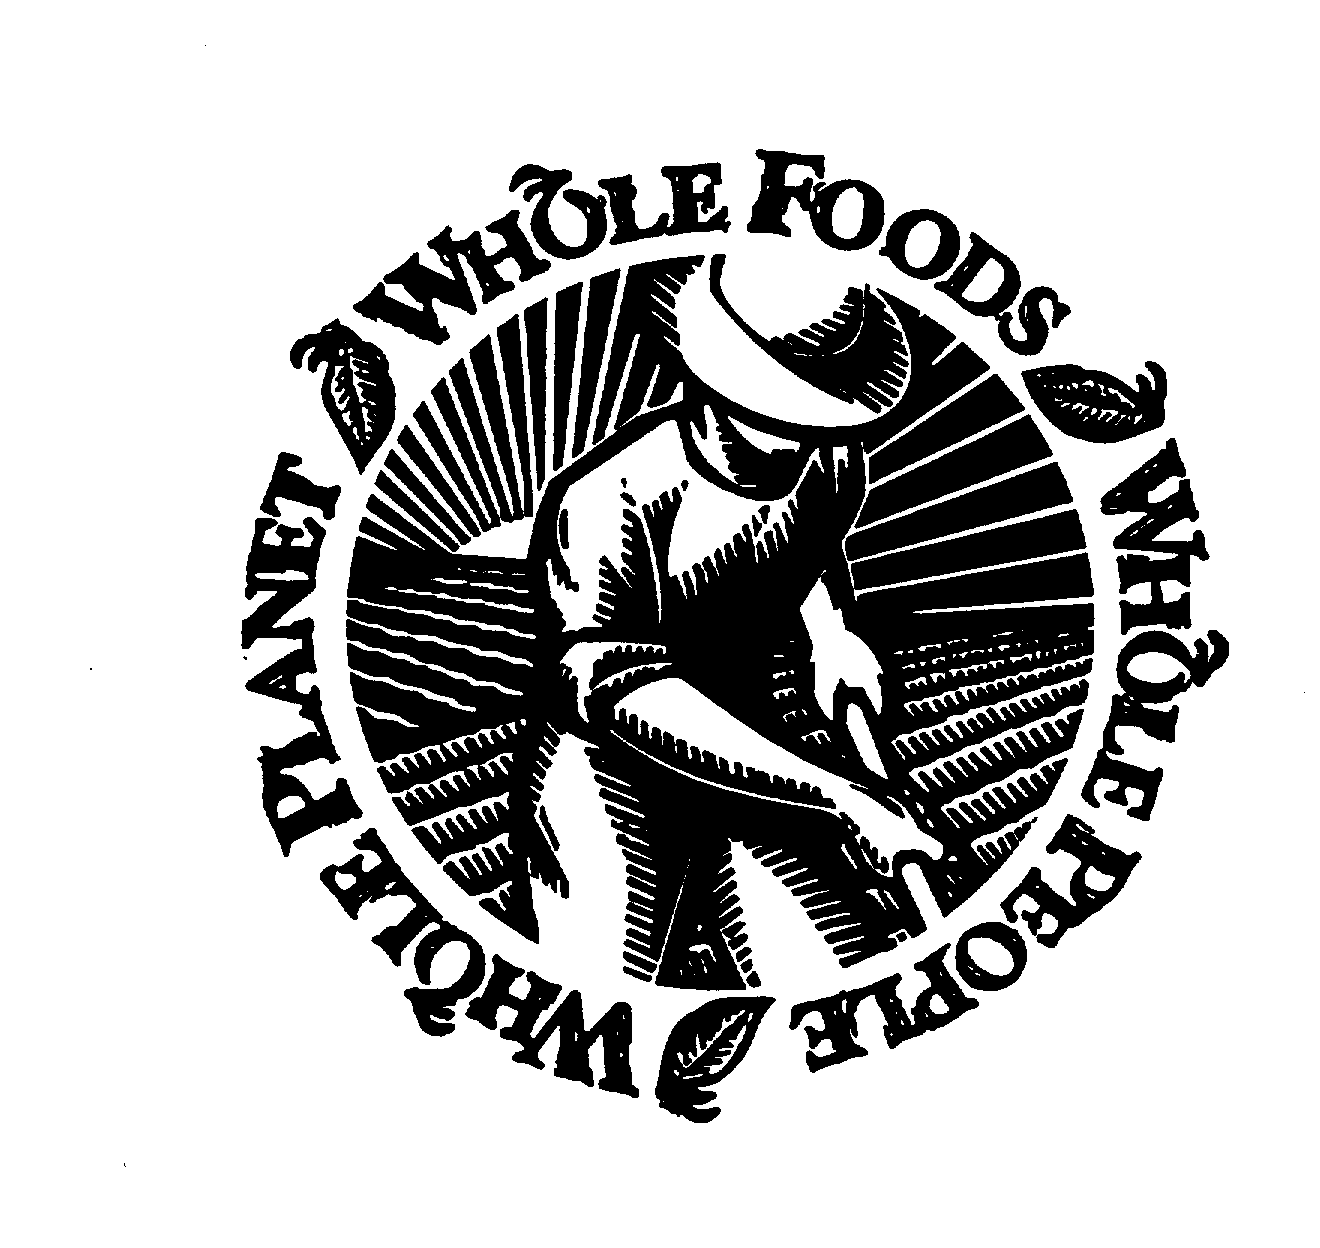  WHOLE FOODS WHOLE PEOPLE WHOLE PLANET